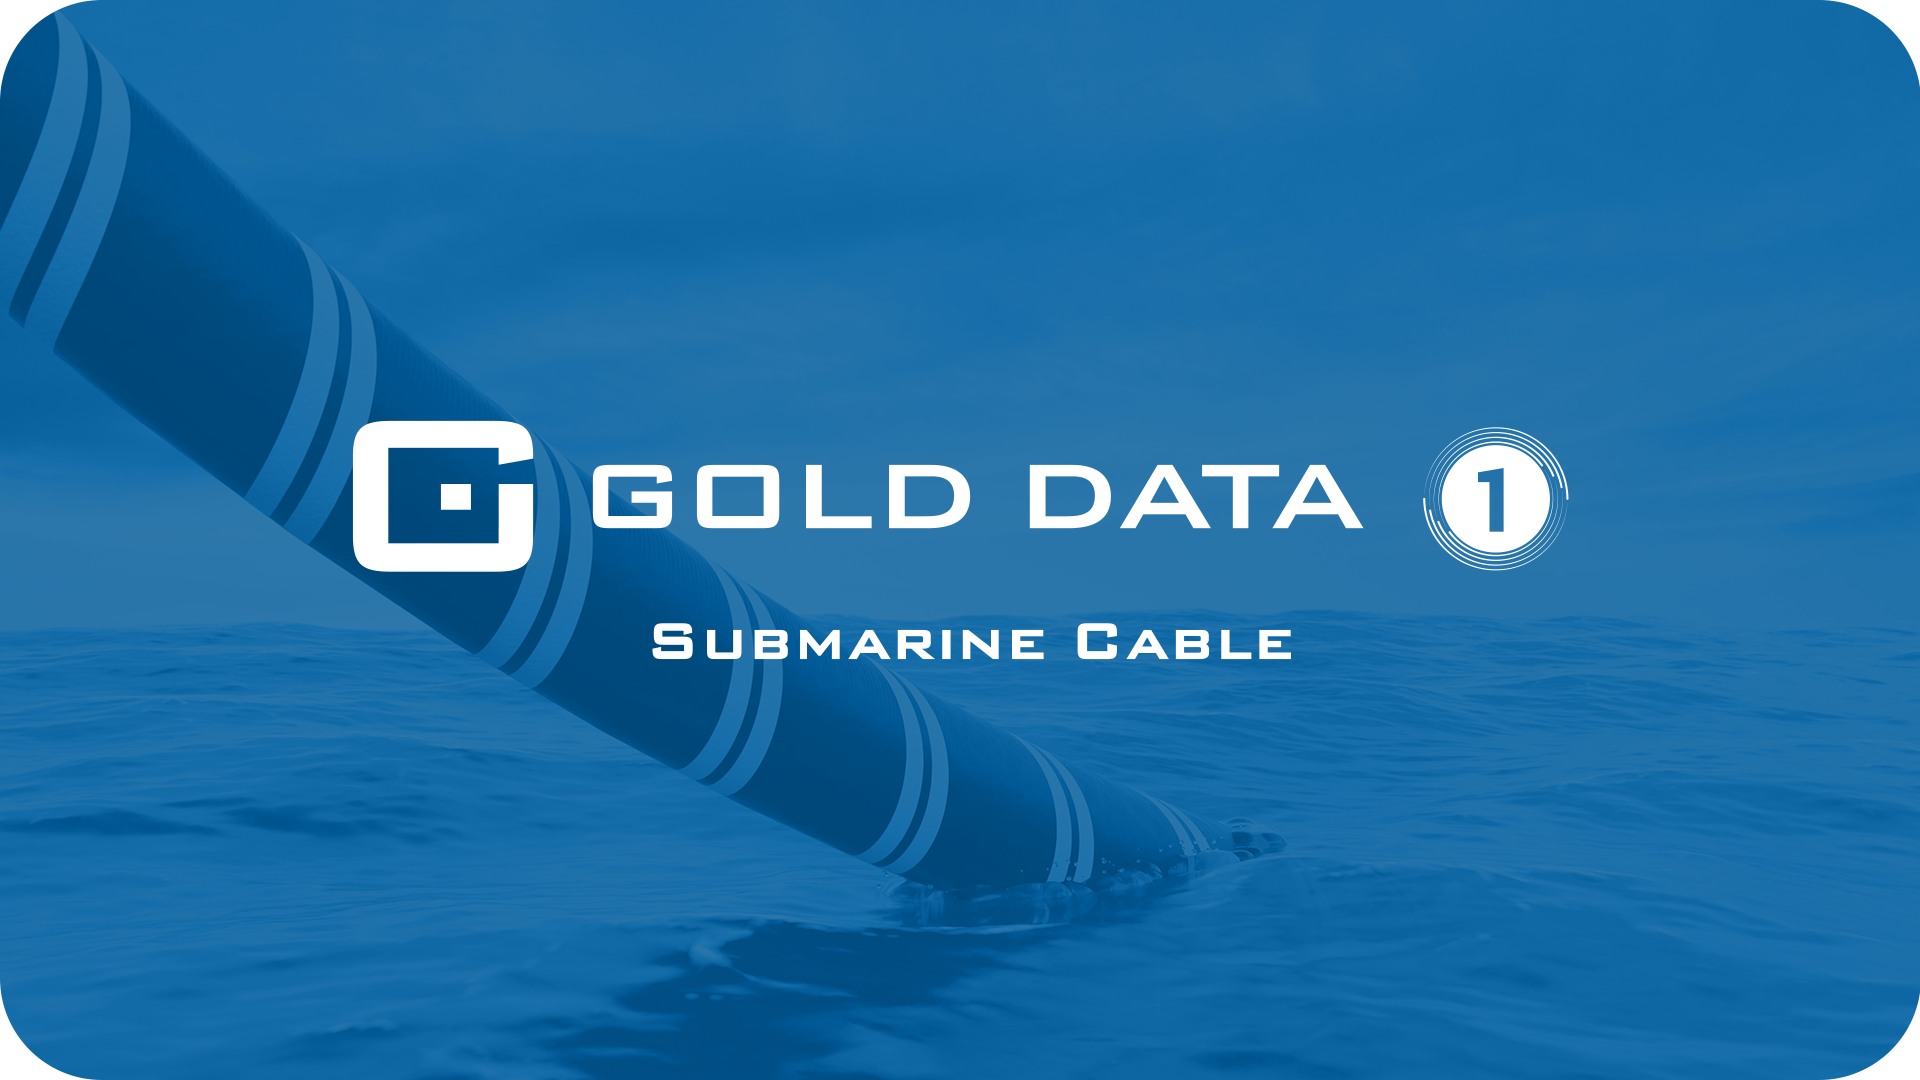 Gold Data 1 Submarine Cable